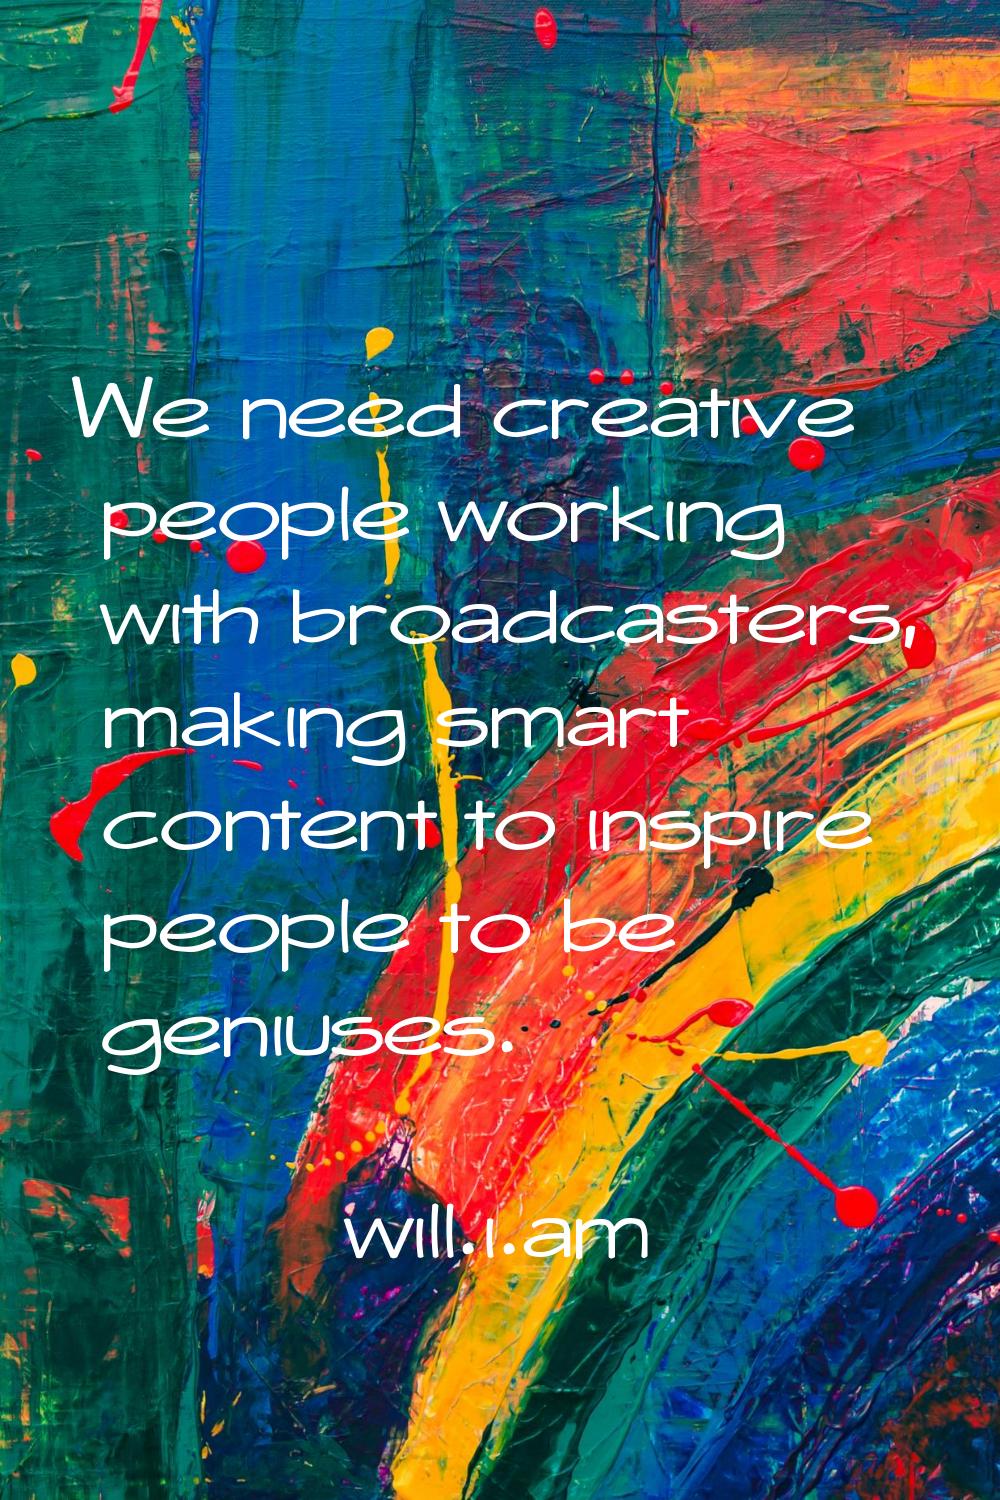 We need creative people working with broadcasters, making smart content to inspire people to be gen